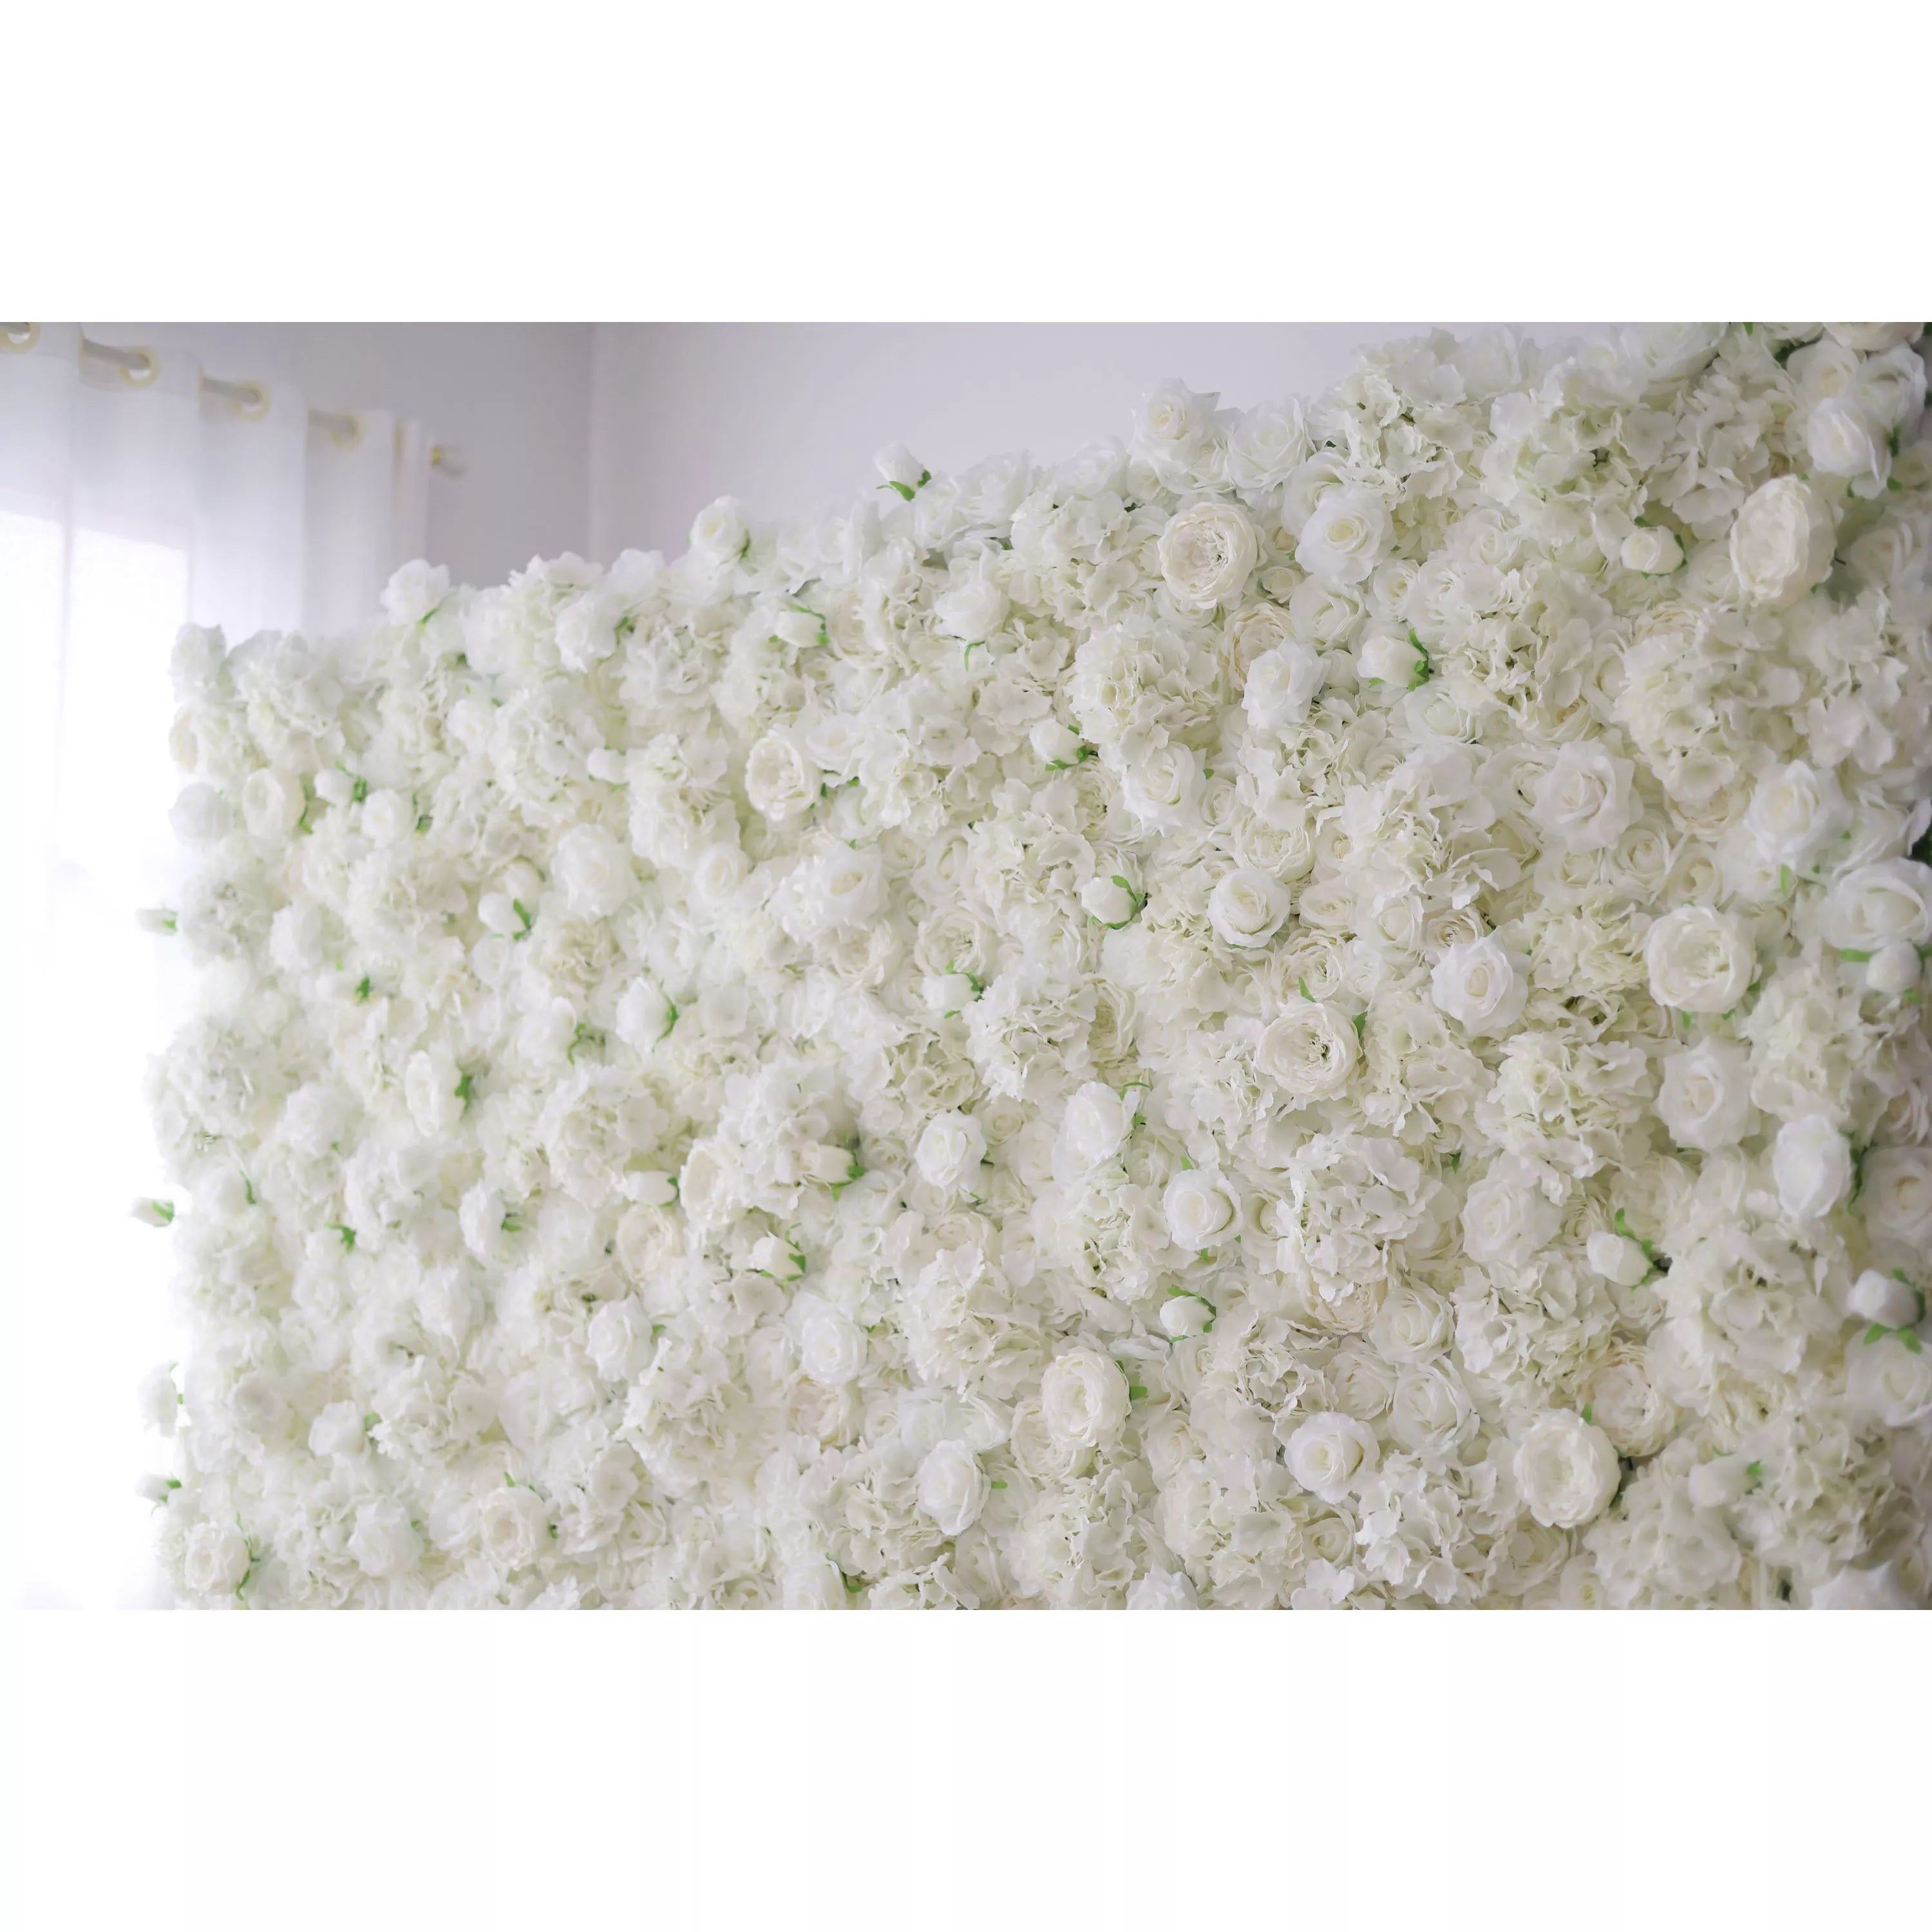 Valar Flower Unveils: Ethereal White Elegance – A Majestic Artificial Fabric Flower Wall Dripping with Pure White Blossoms-VF-210